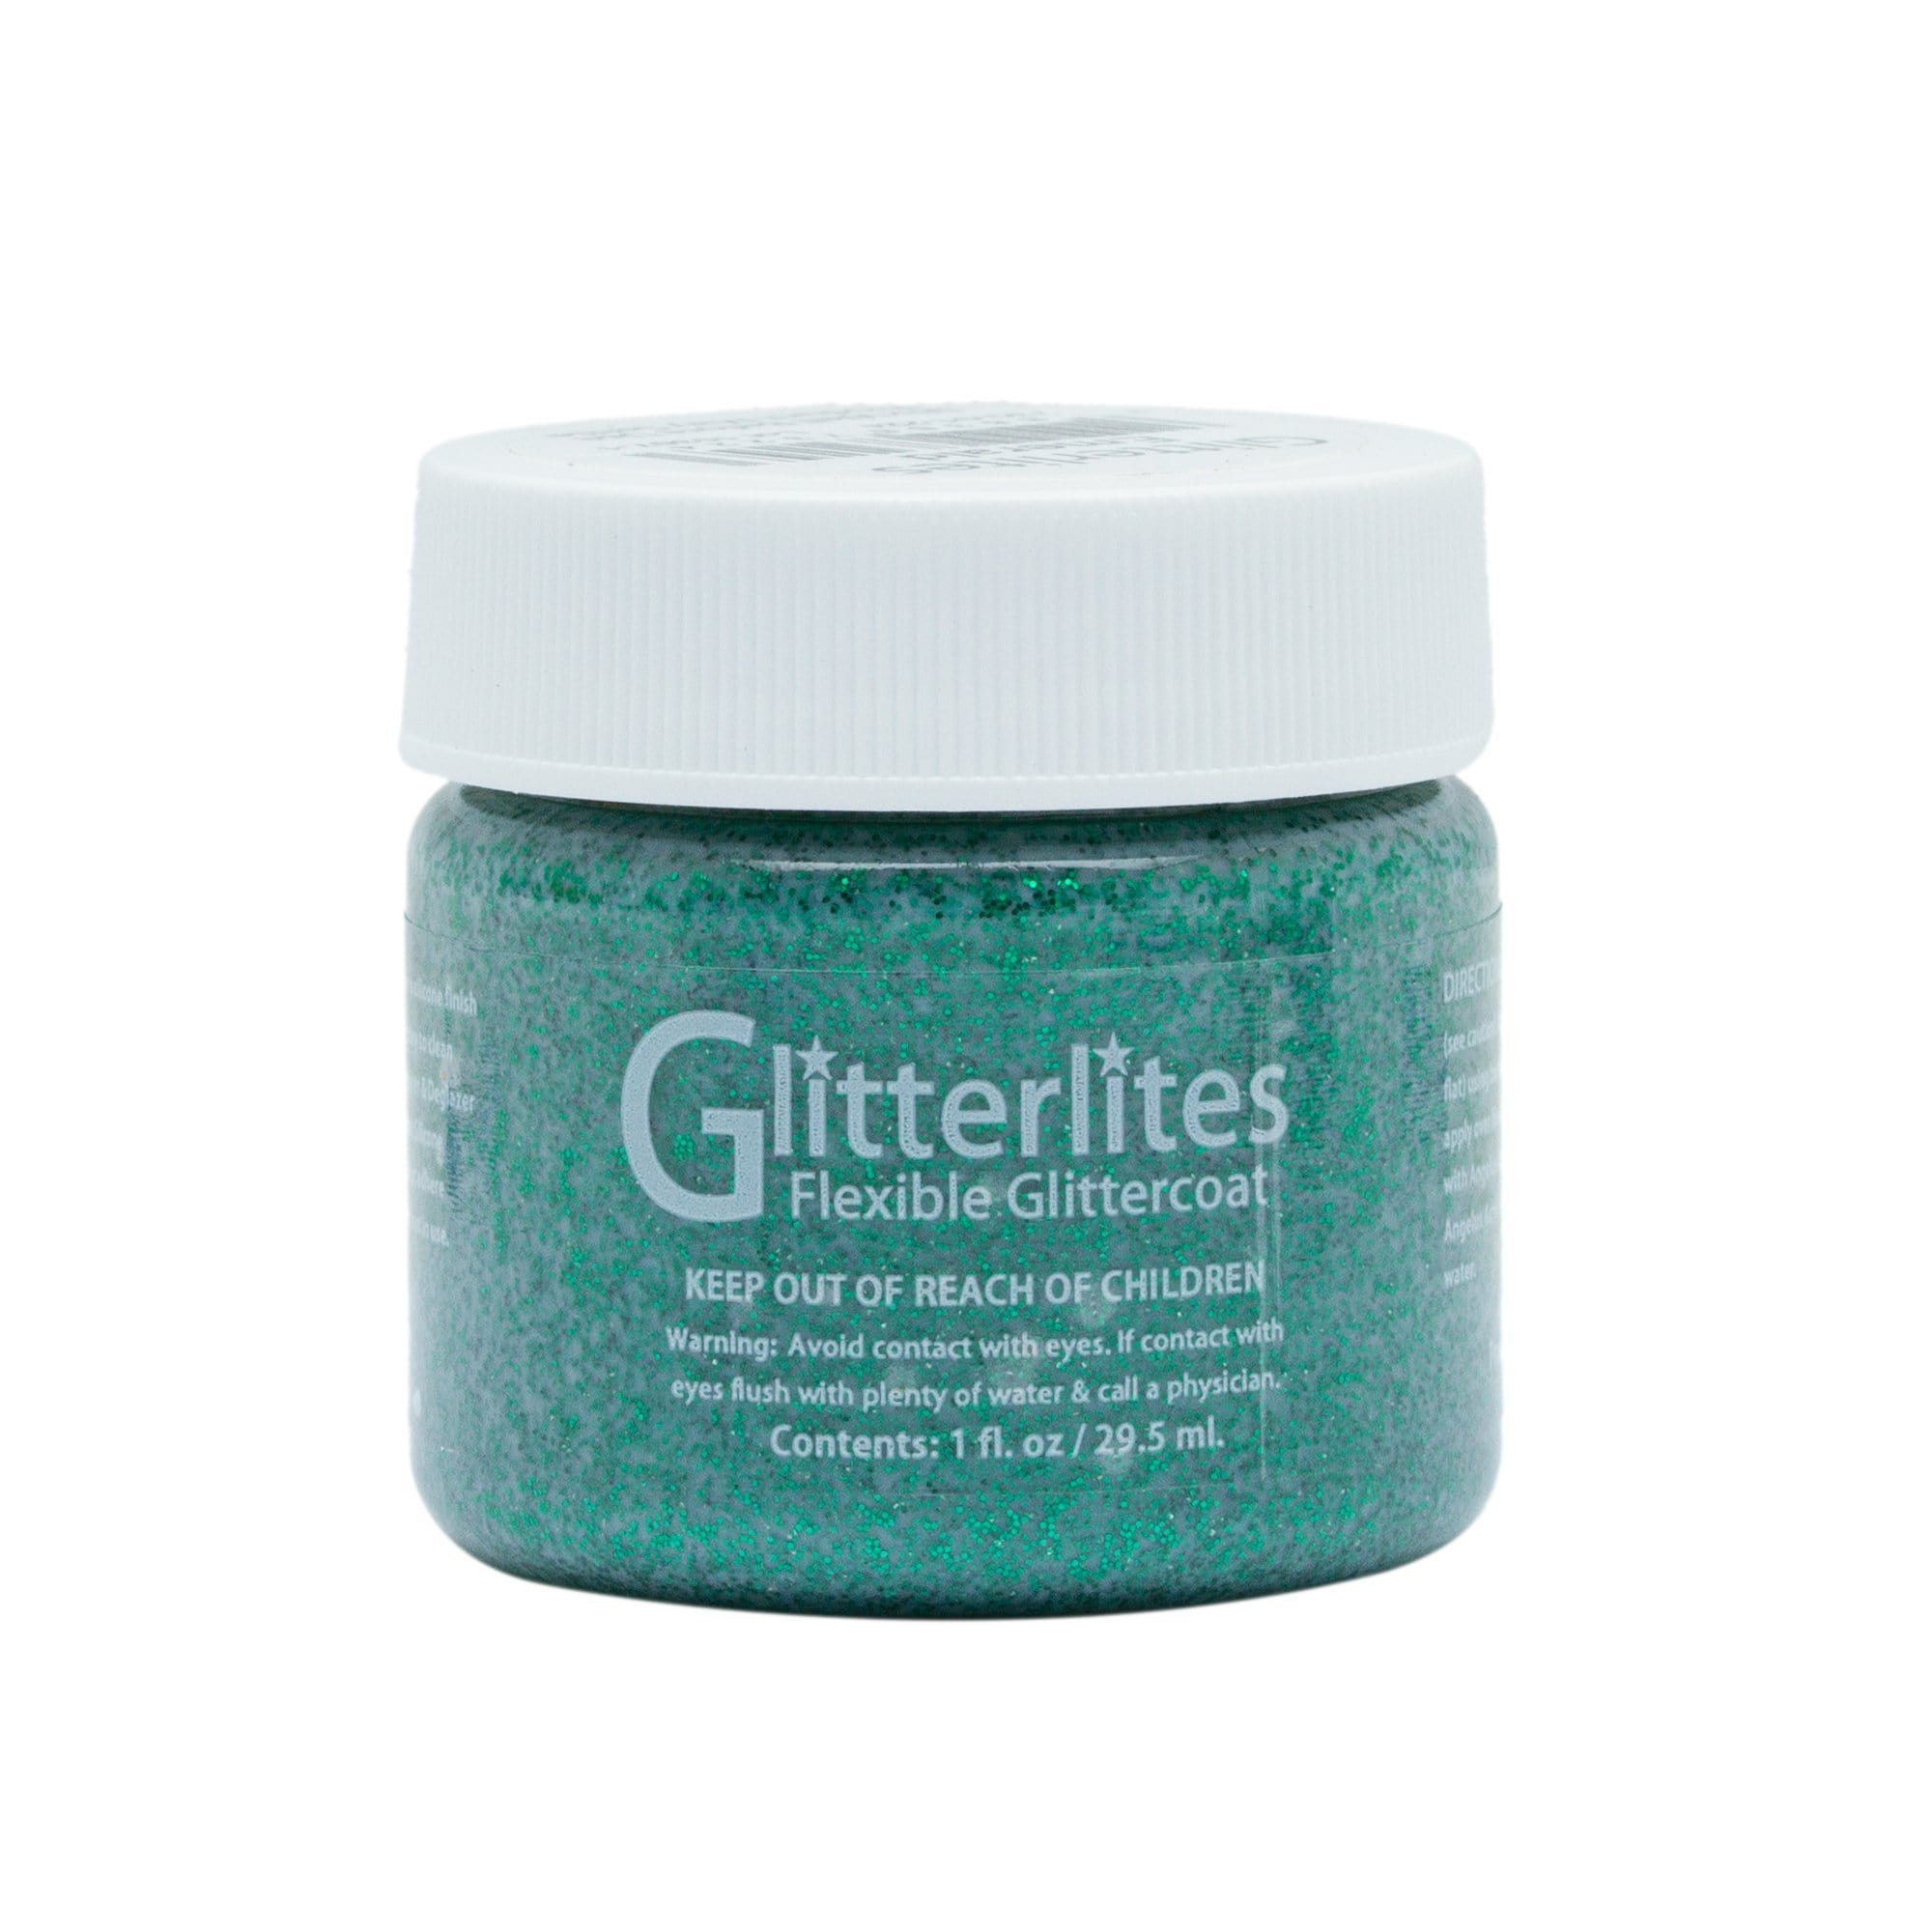 Angelus Glitterlites is a premium leather paint that adds a clean coat of glitter.